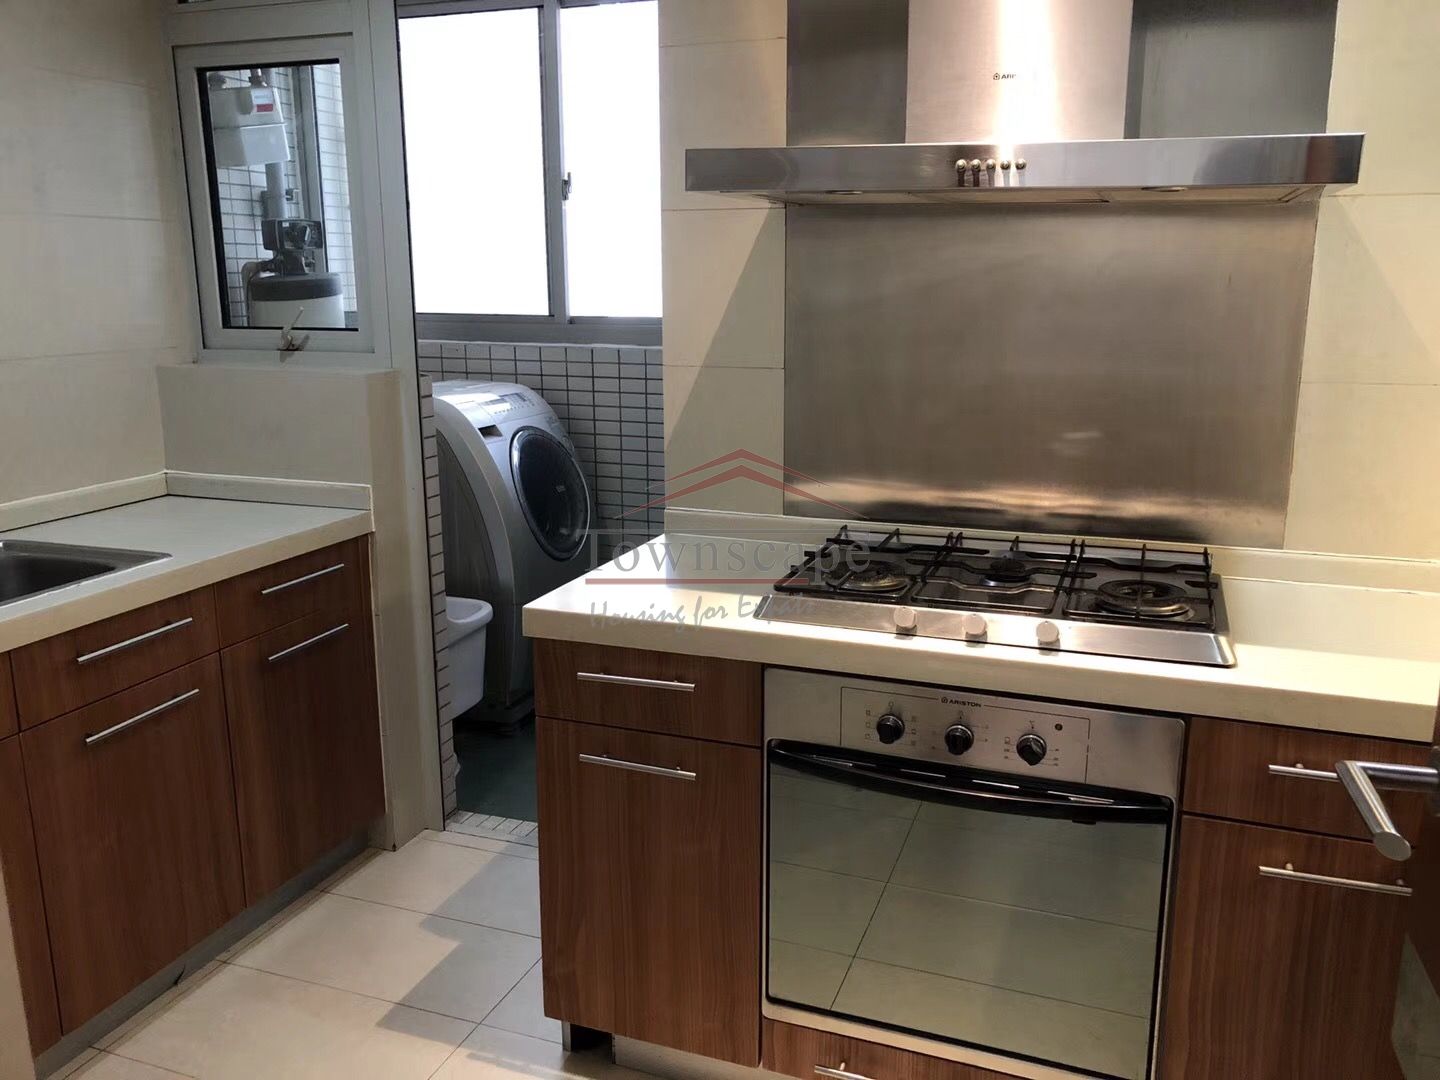  Modern 2BR Apartment with Floor Heating at Suzhou Creek